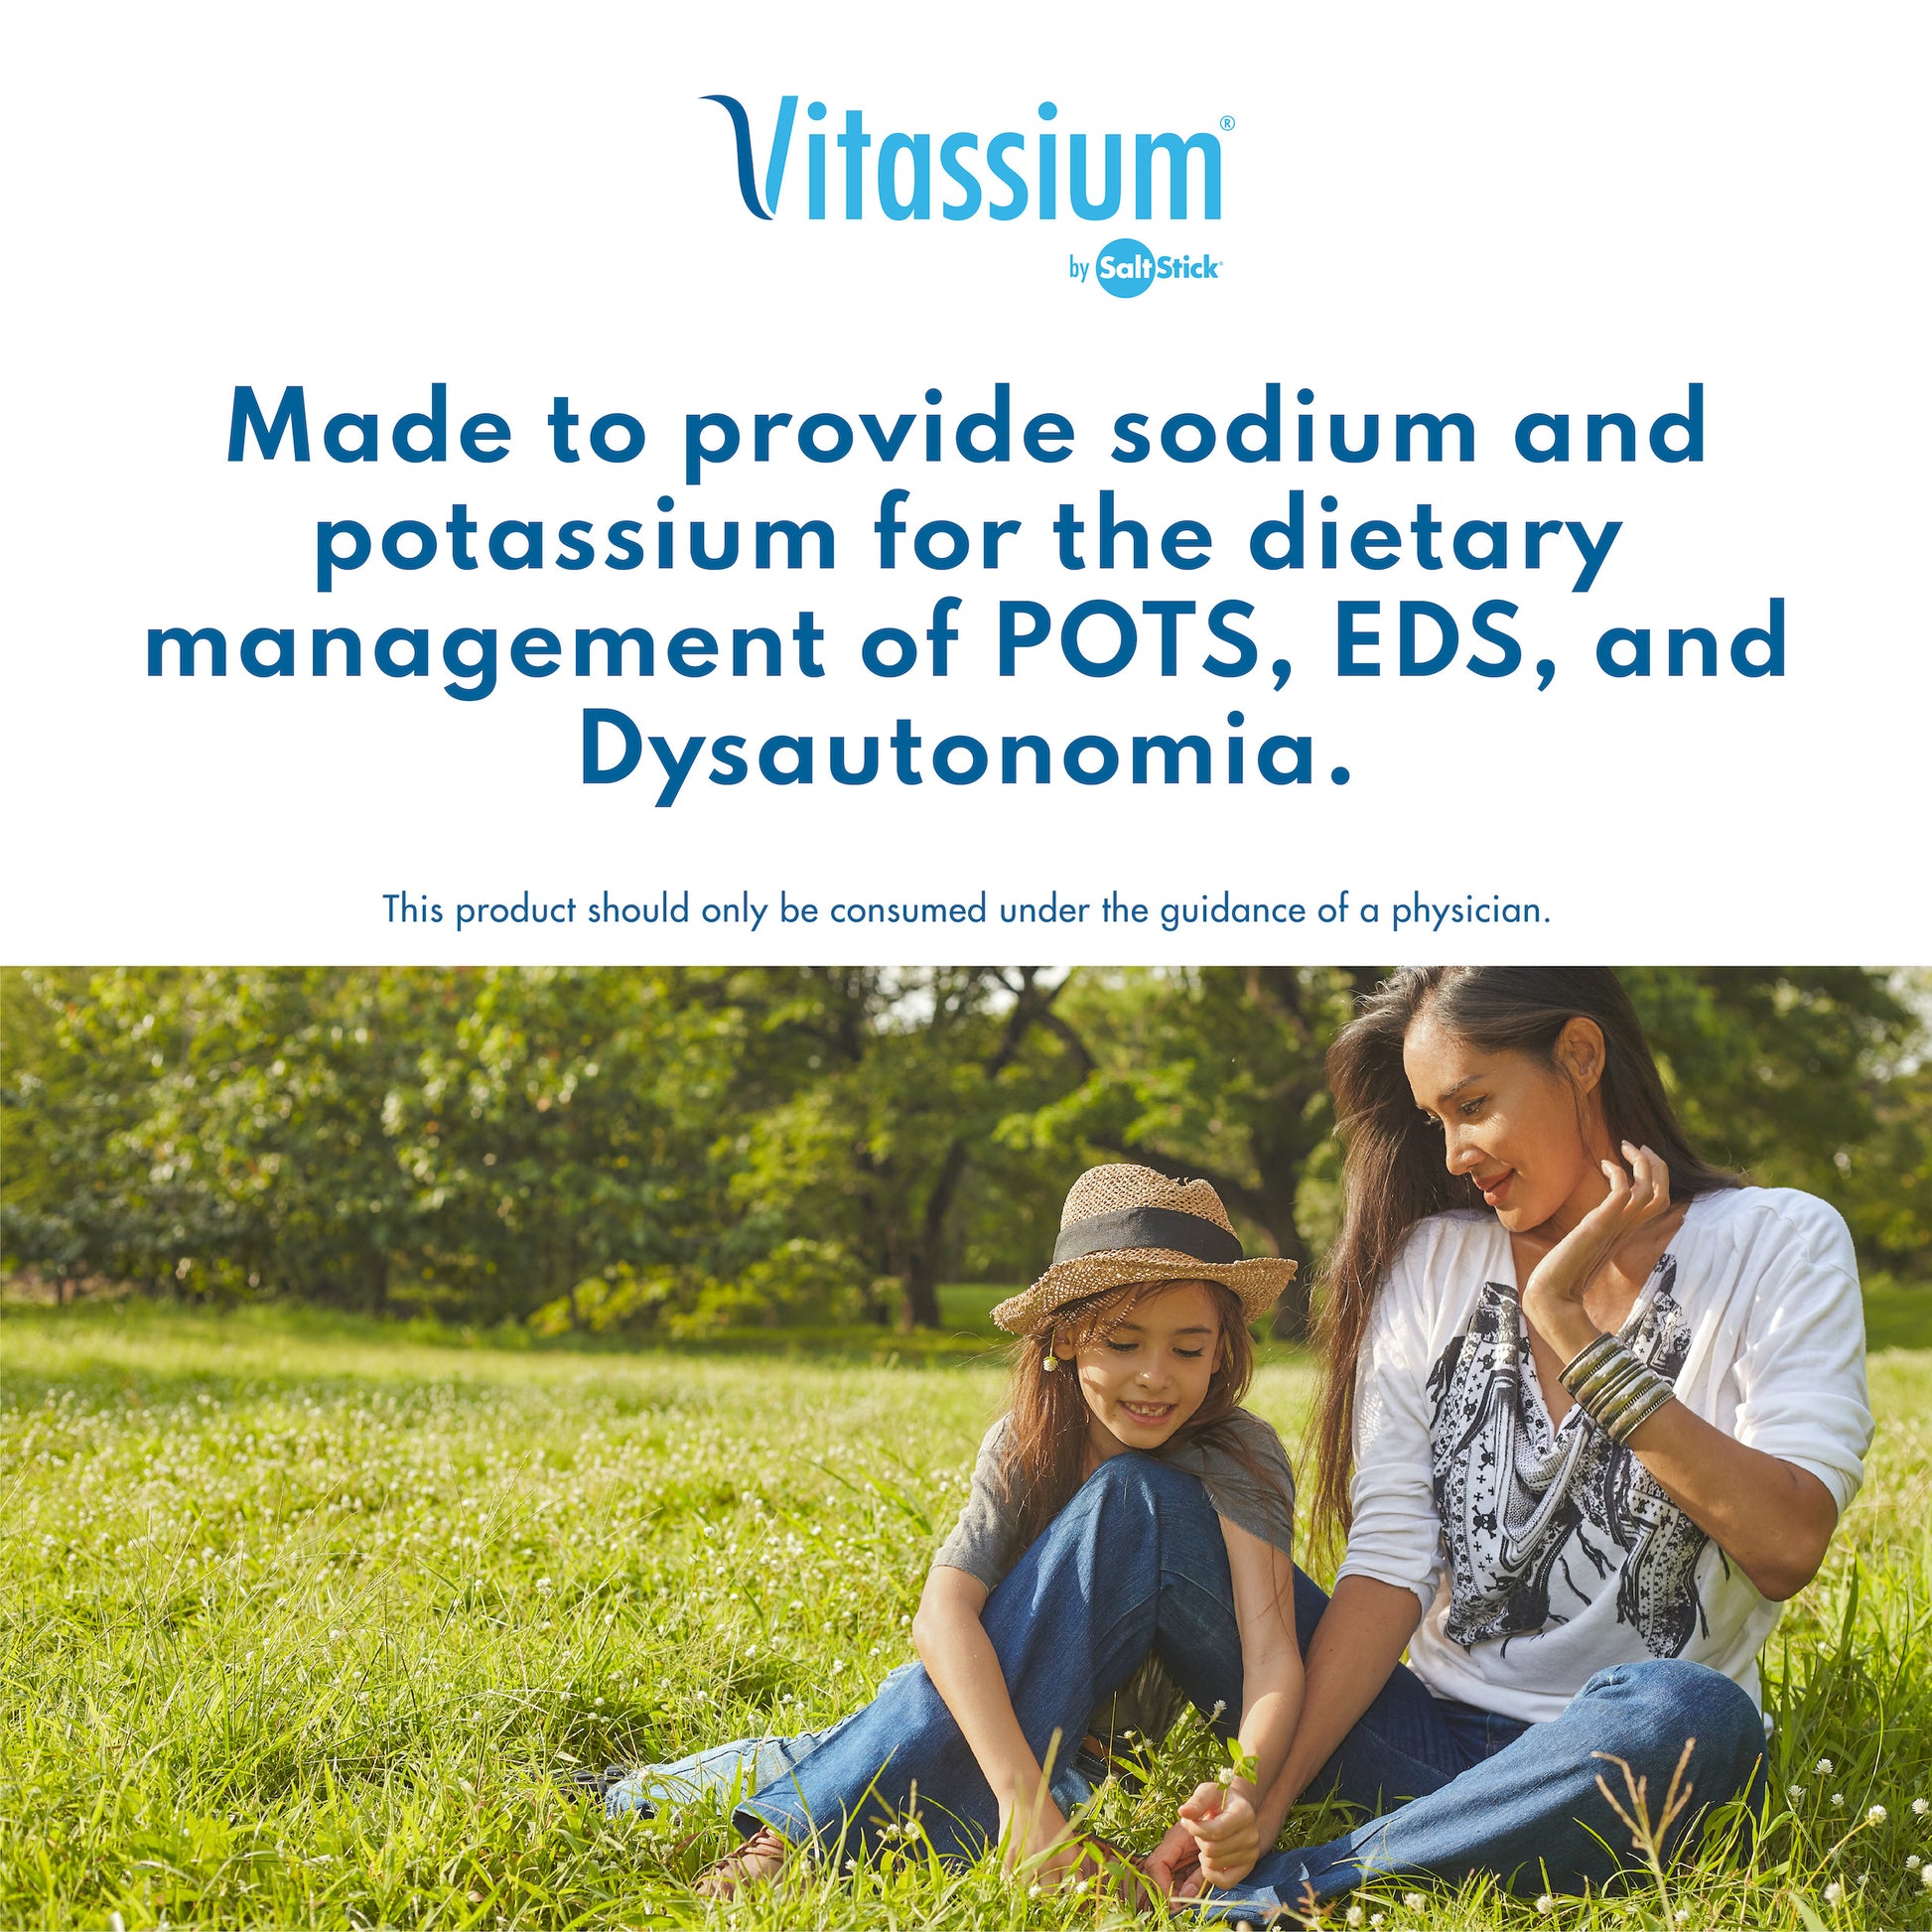 Vitassium is made to provide sodium and potassium for the dietary management of POTS, EDS, and Dysautonomia. This product should only be consumed under the guidance of a physician.